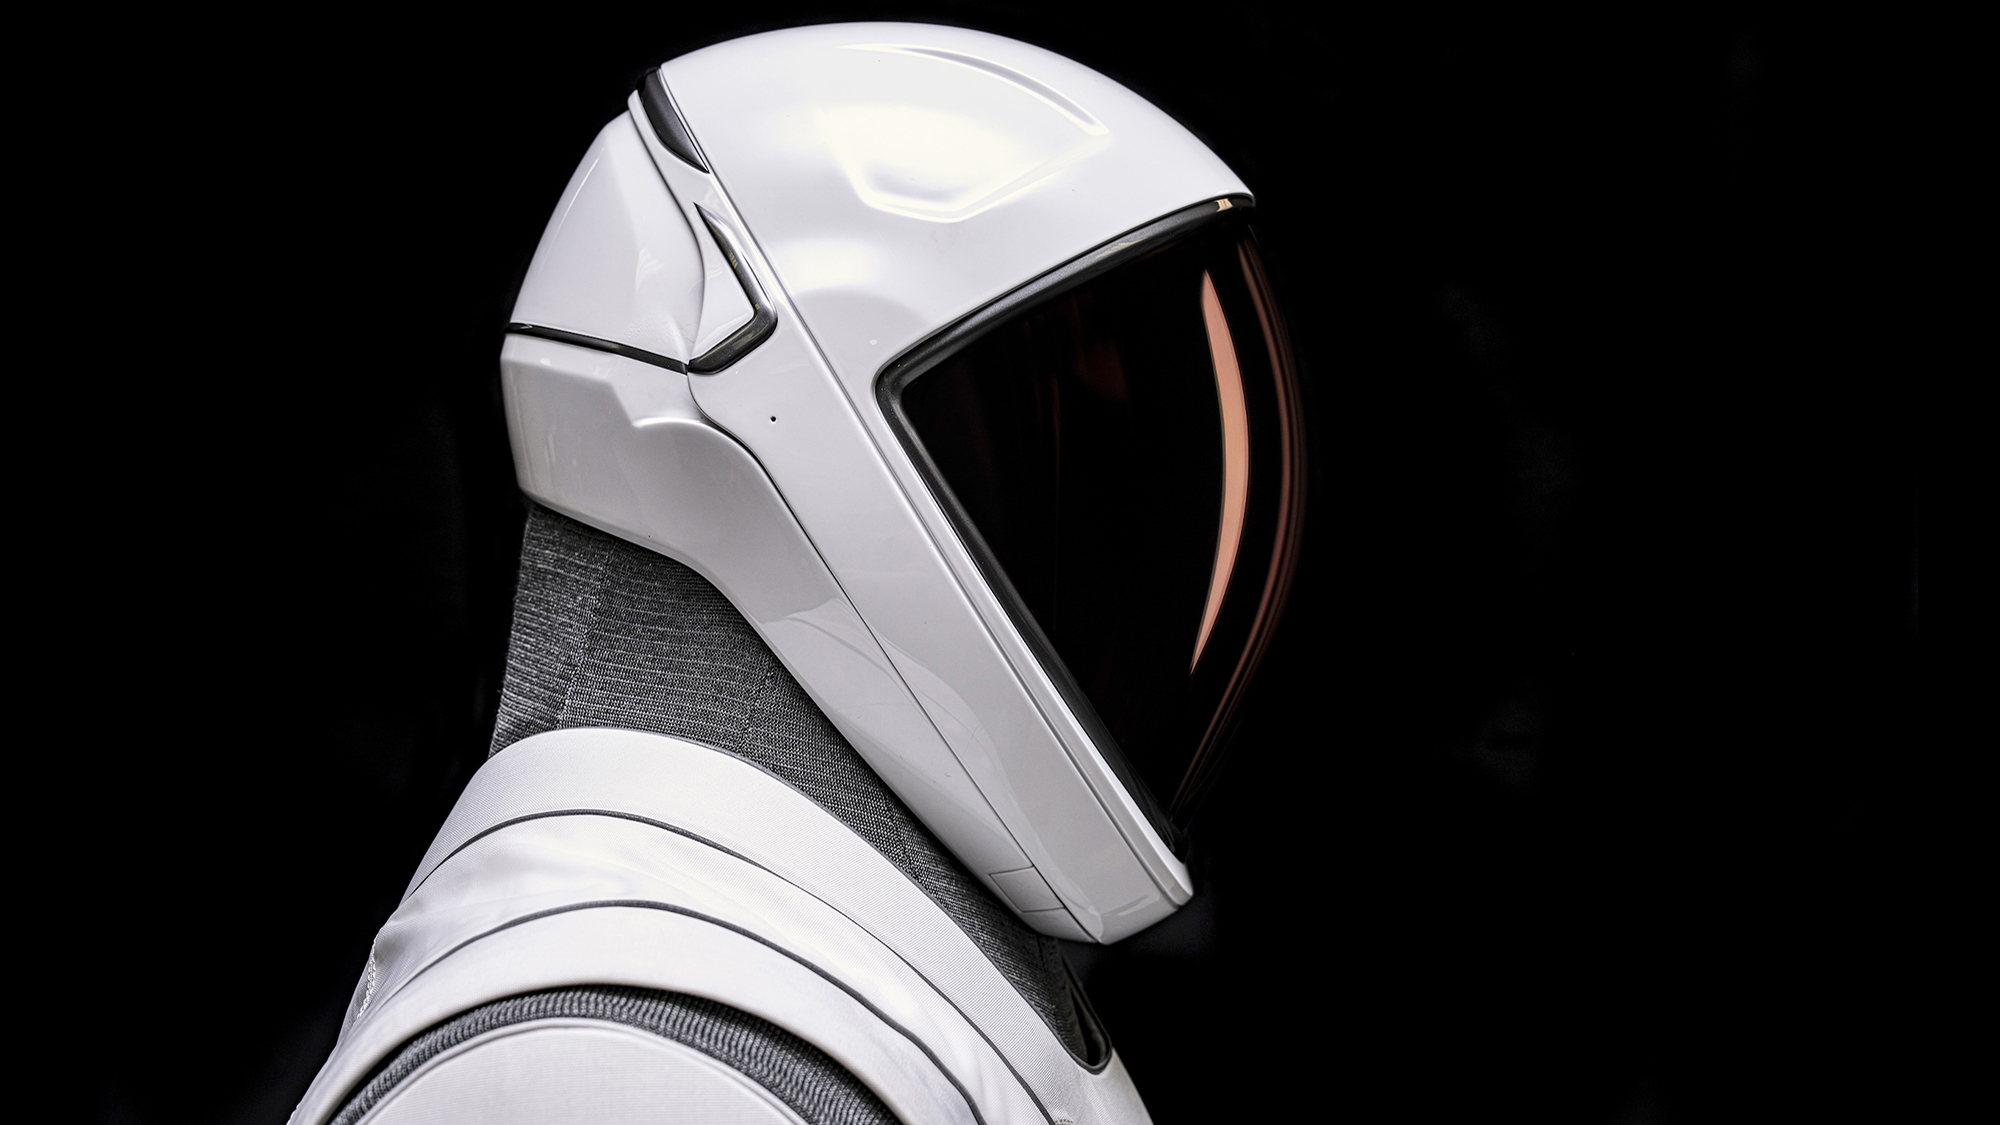 SpaceX reveals new sleek spacesuits ahead of upcoming historic mission